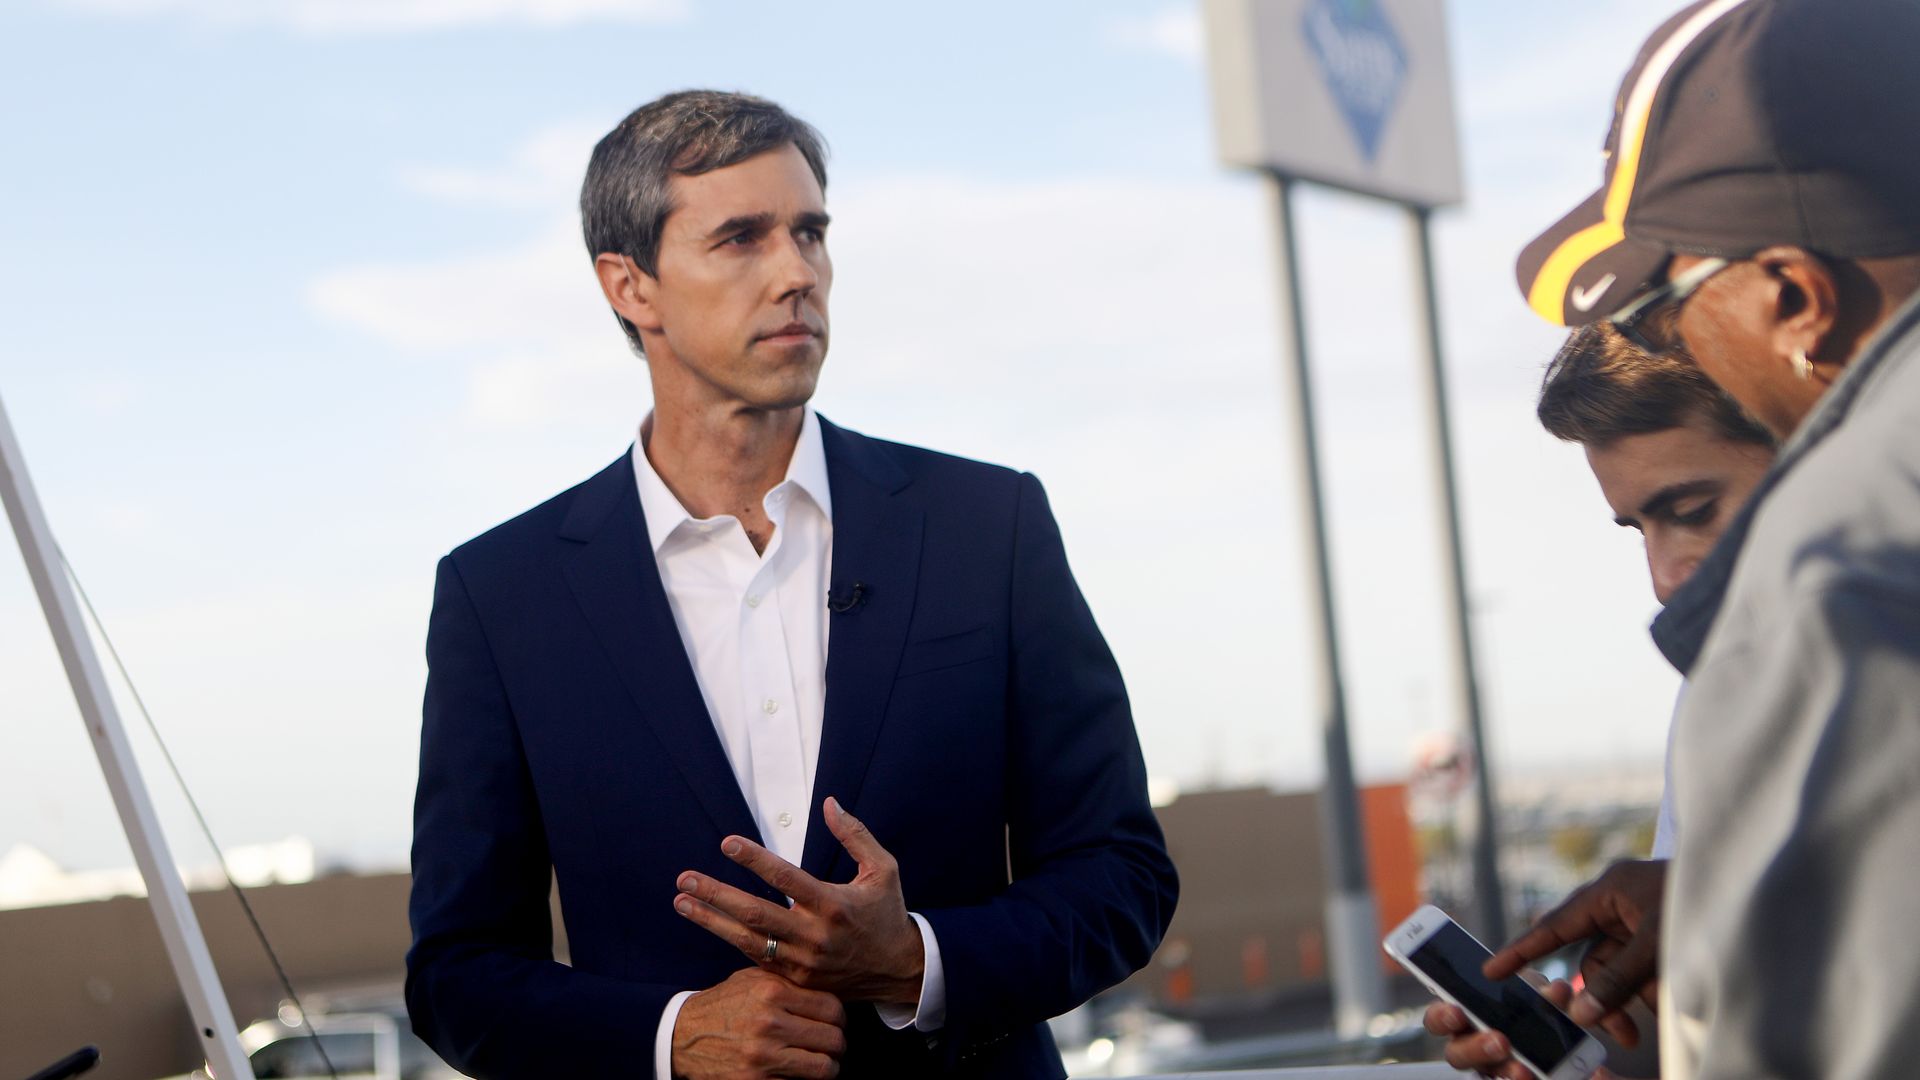 Democratic presidential candidate and former Rep. Beto O’Rourke prepares to be interviewed outside Walmart near the scene of a mass shooting which left at least 20 people dead